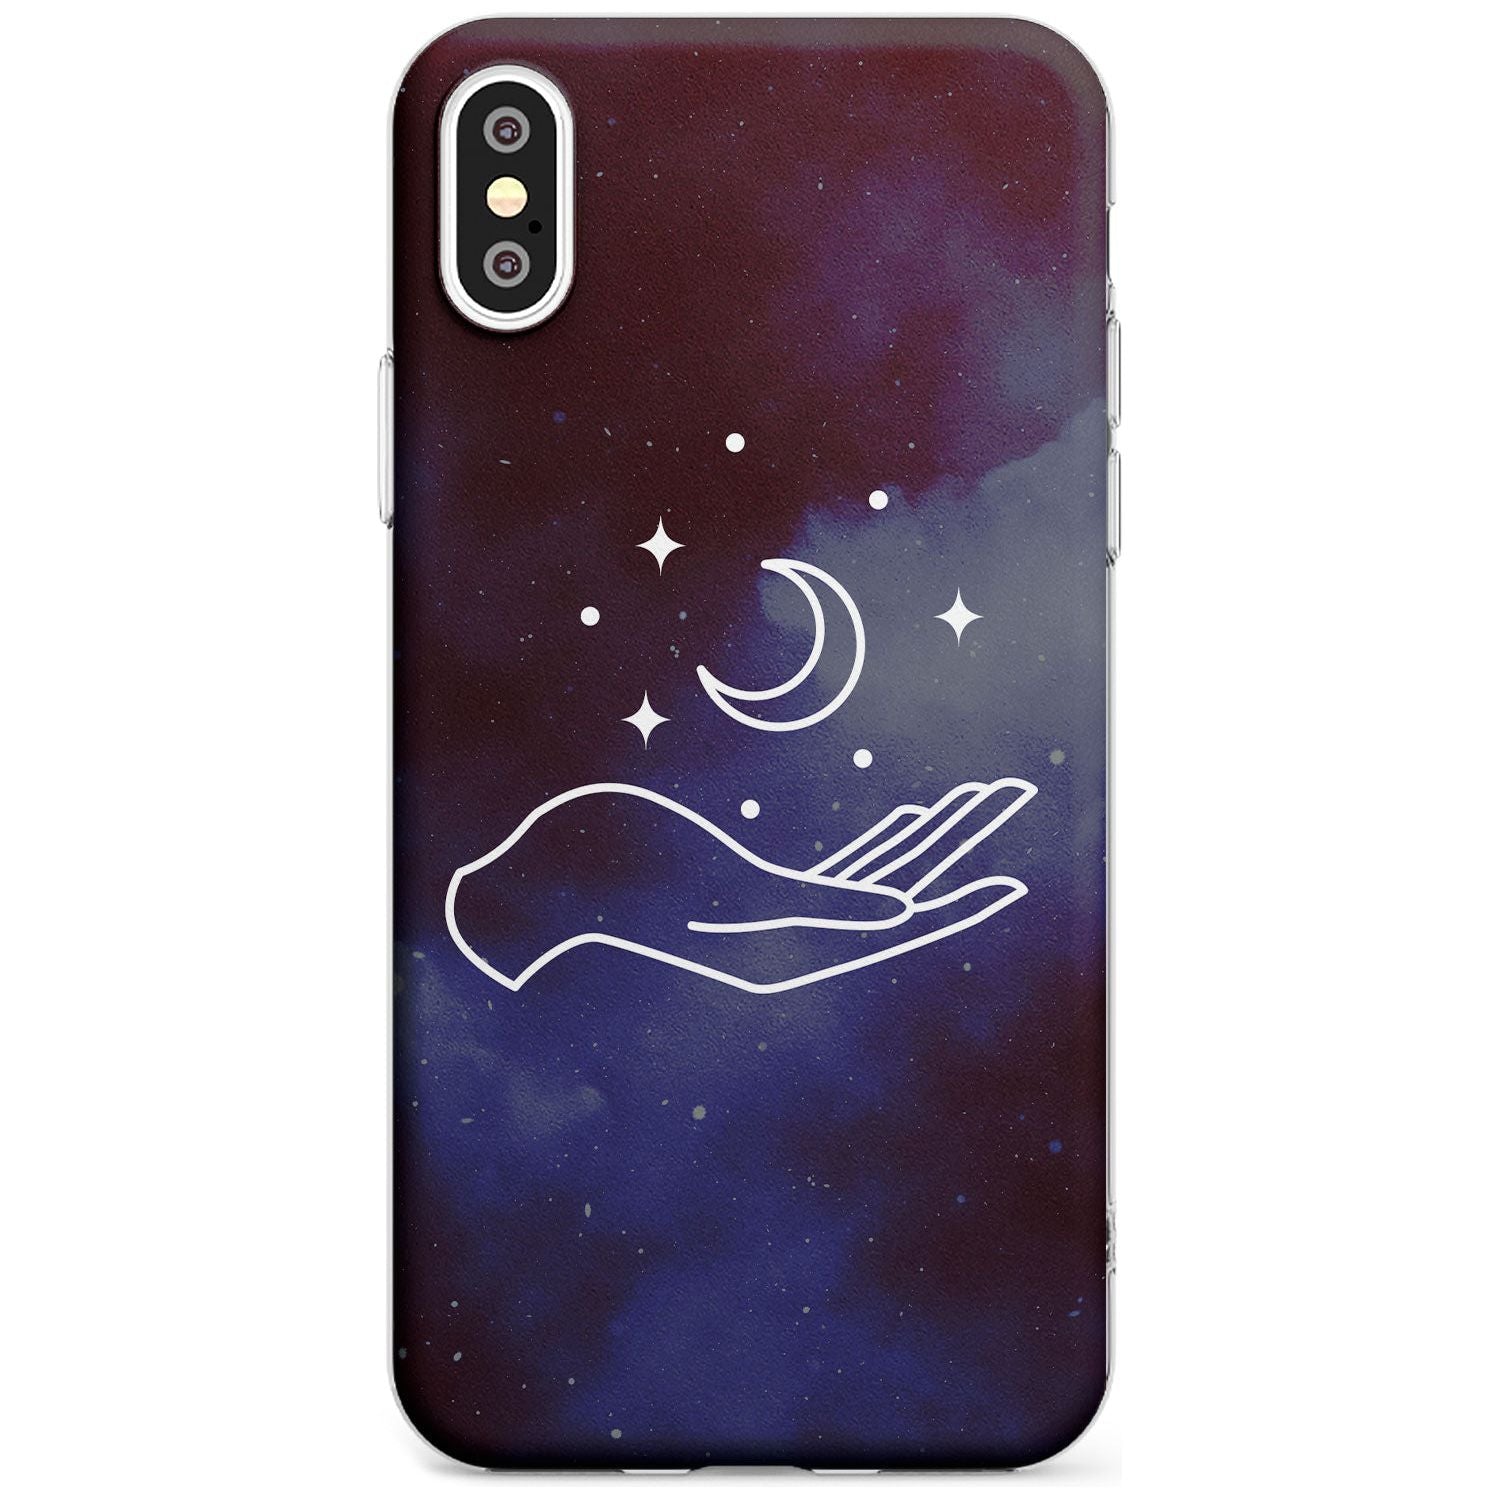 Floating Moon Above Hand Black Impact Phone Case for iPhone X XS Max XR